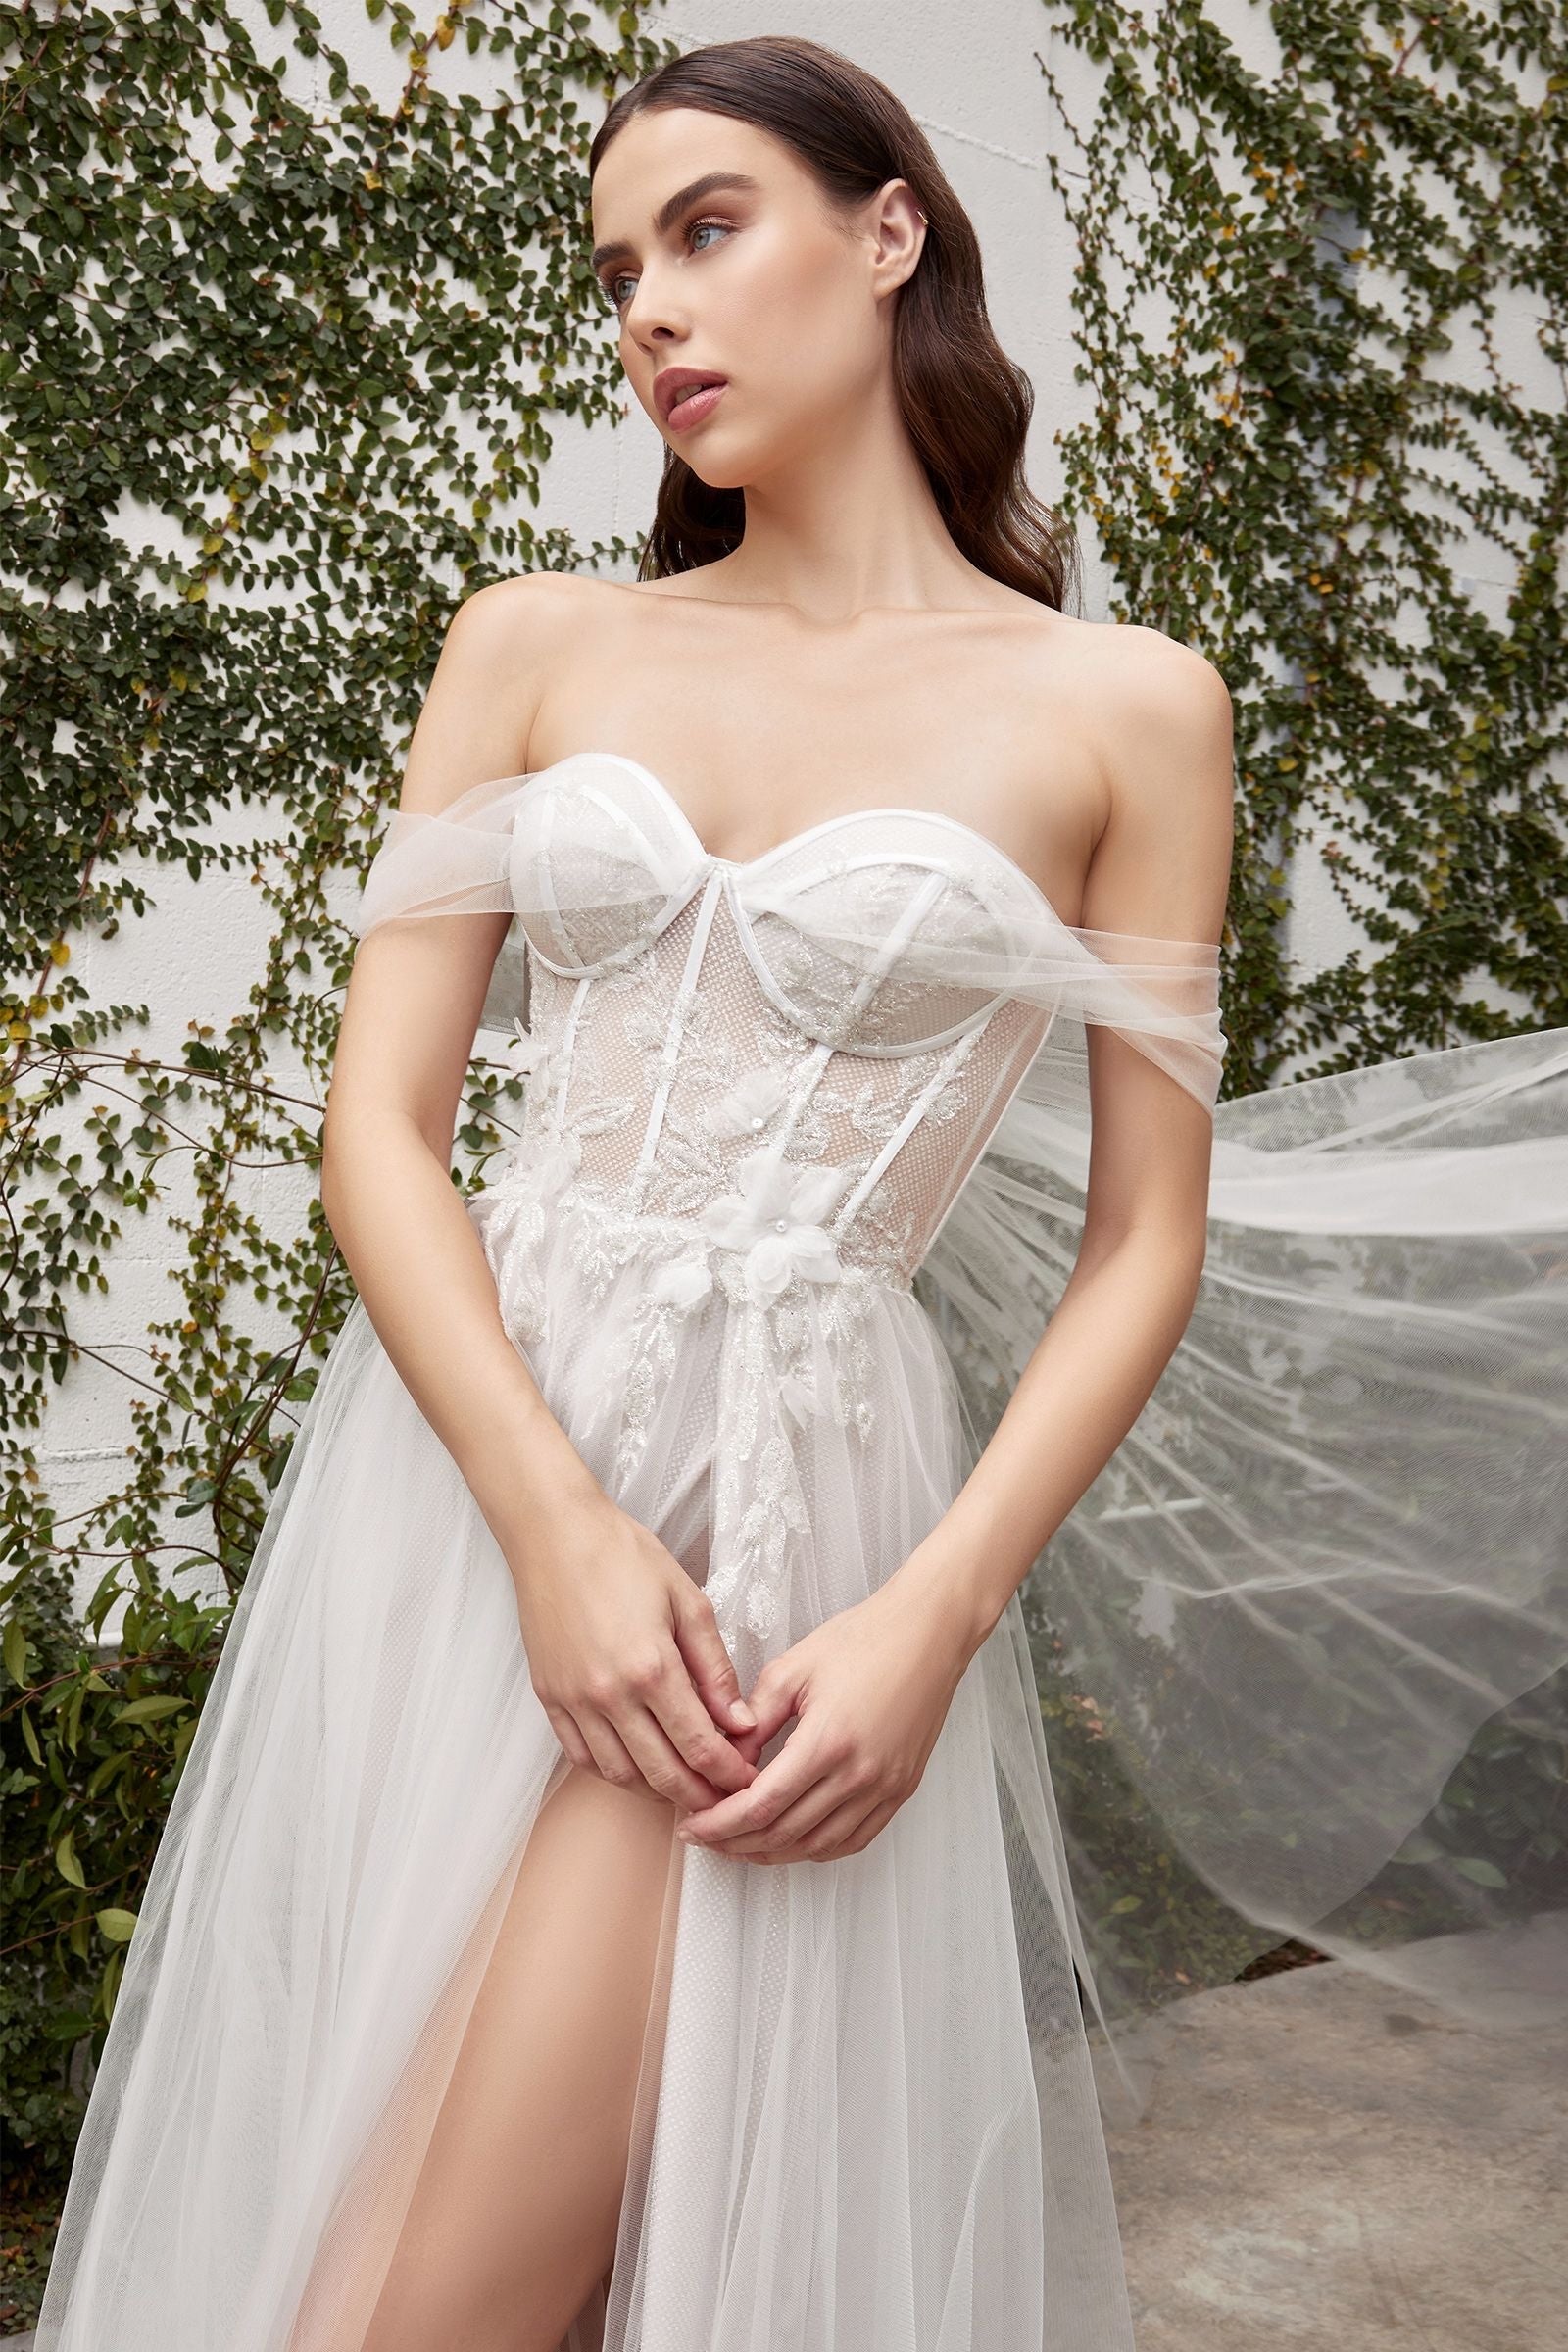 Romantic dress featuring a tie-back cape and delicate organza floral embellishments